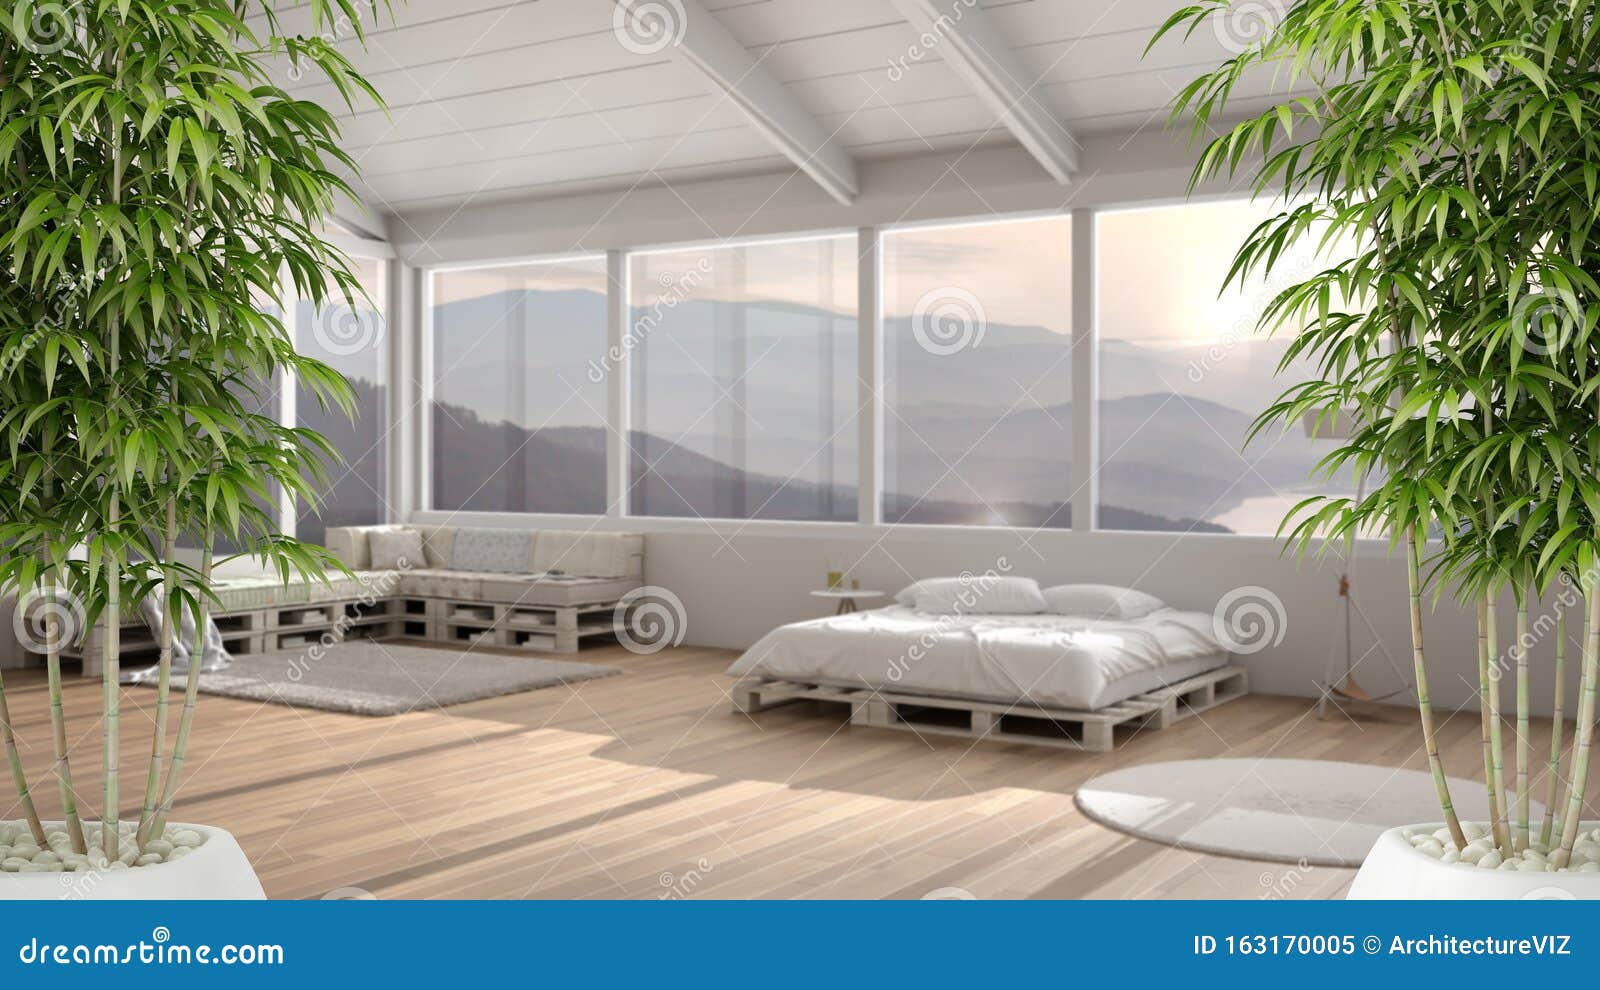 Zen Interior With Potted Bamboo Plant Natural Interior Design Concept Scandinavian Minimalist Bedroom With Diy Pallet Bed And Stock Illustration Illustration Of Design Furniture 163170005